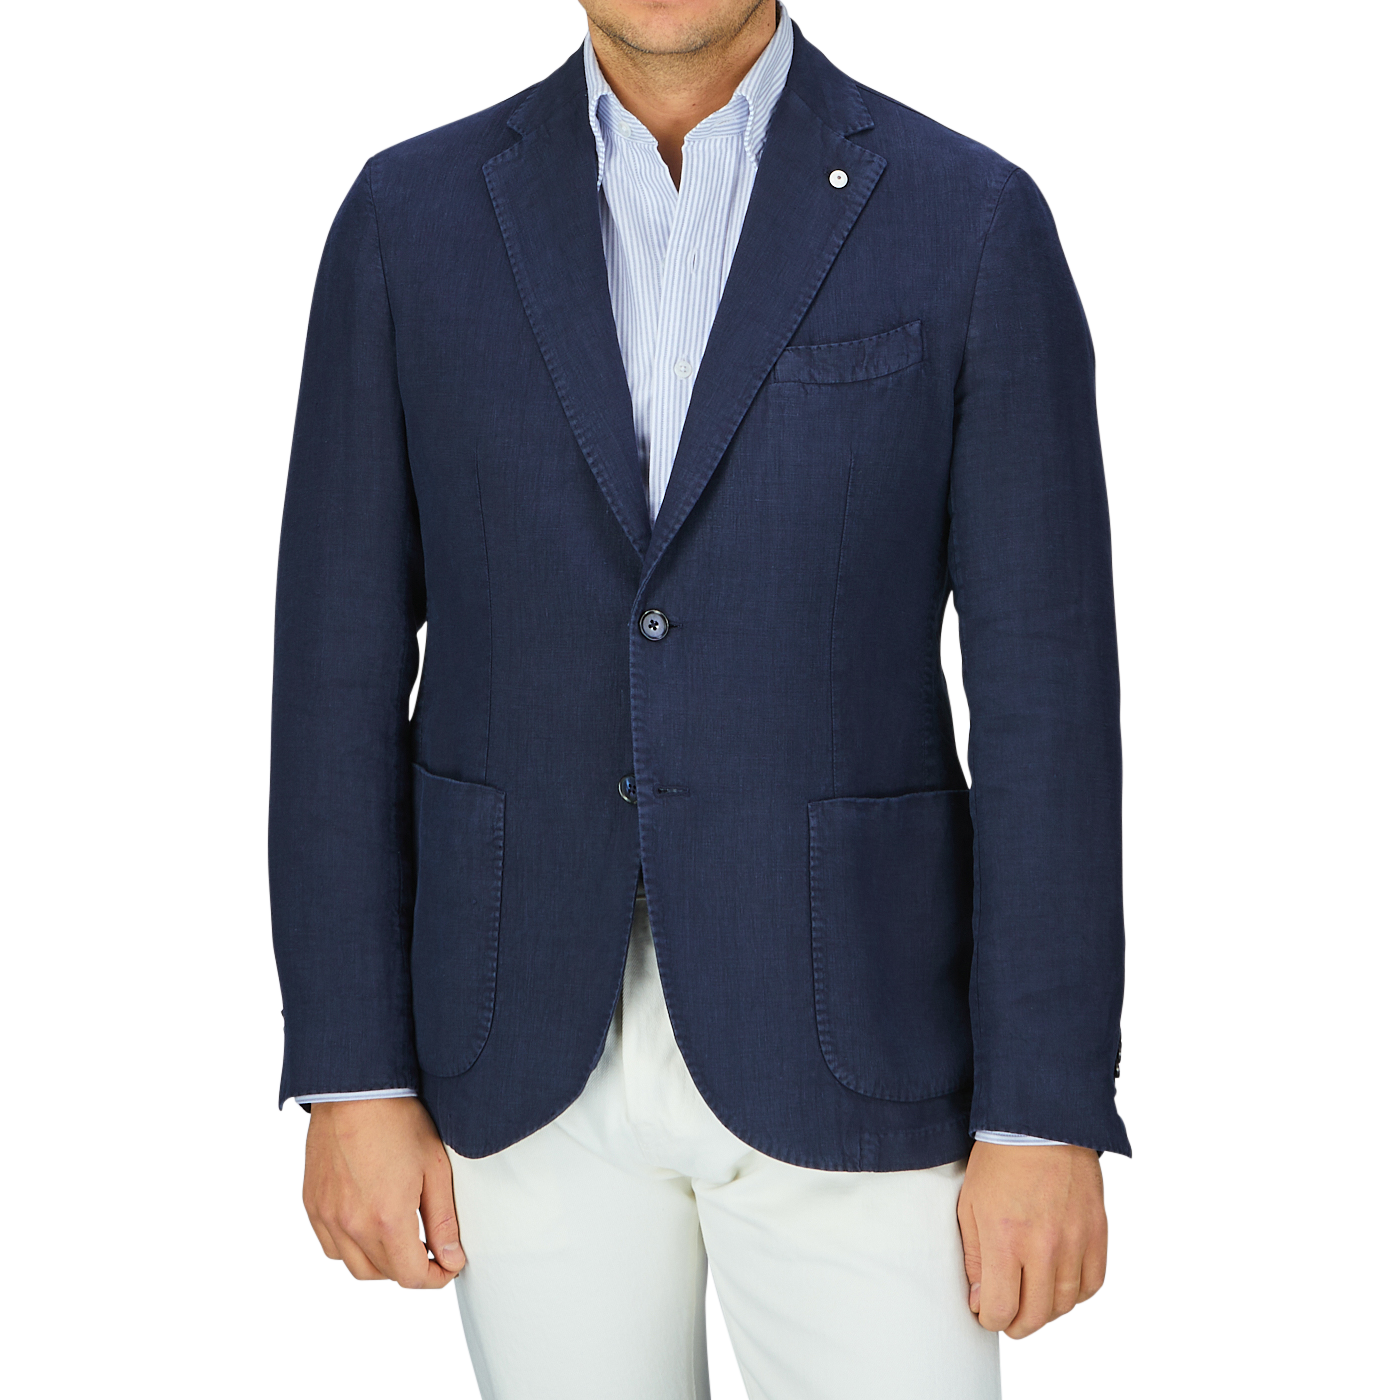 Man wearing a L.B.M. 1911 Navy Blue Washed Linen Blazer and white pants.